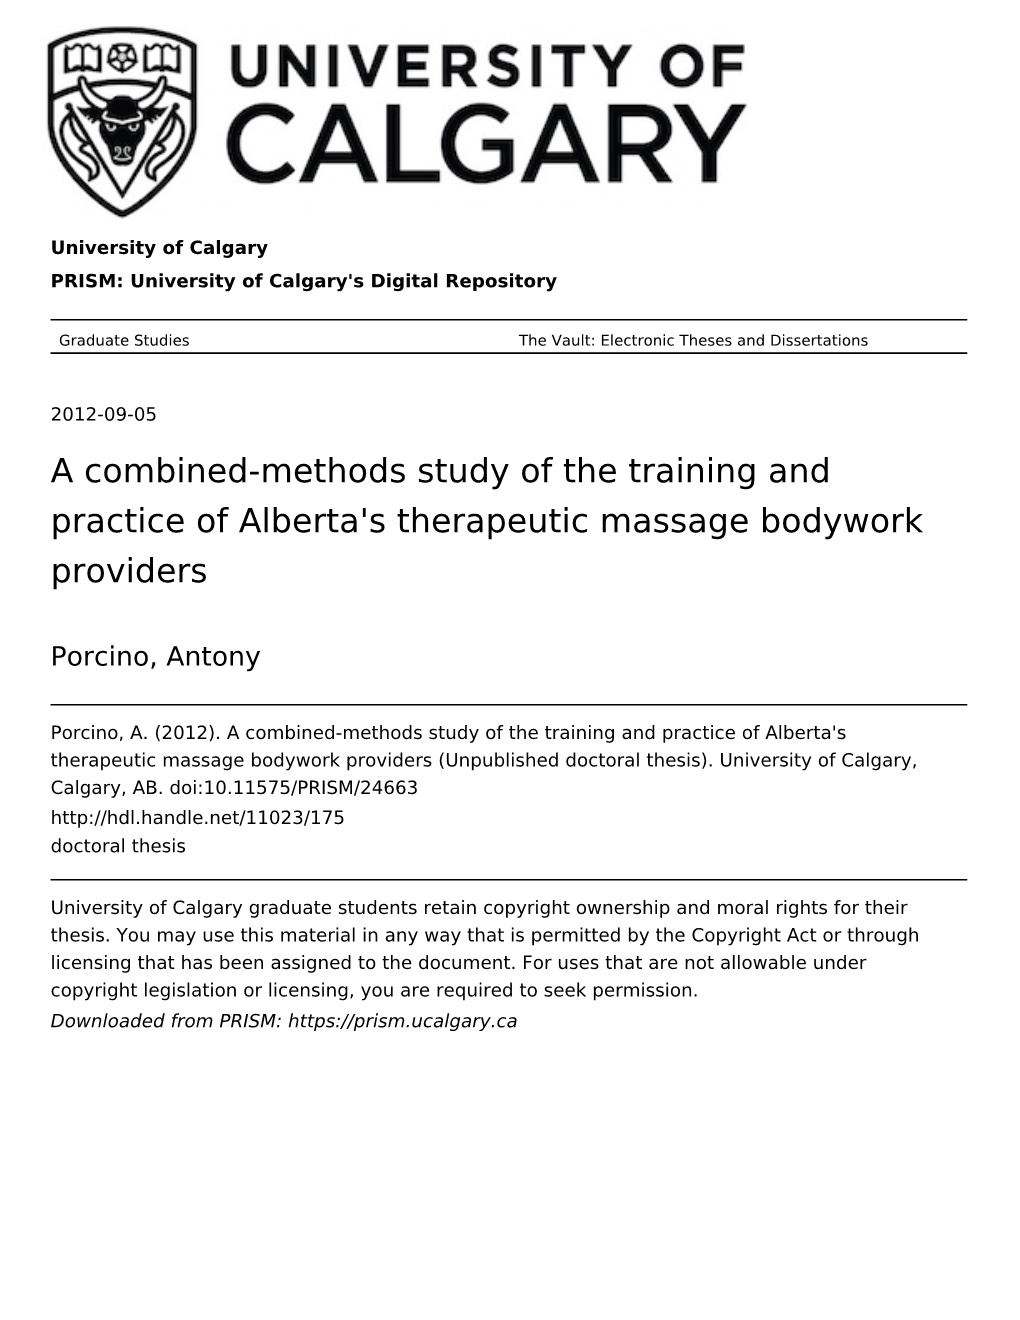 A Combined-Methods Study of the Training and Practice of Alberta's Therapeutic Massage Bodywork Providers